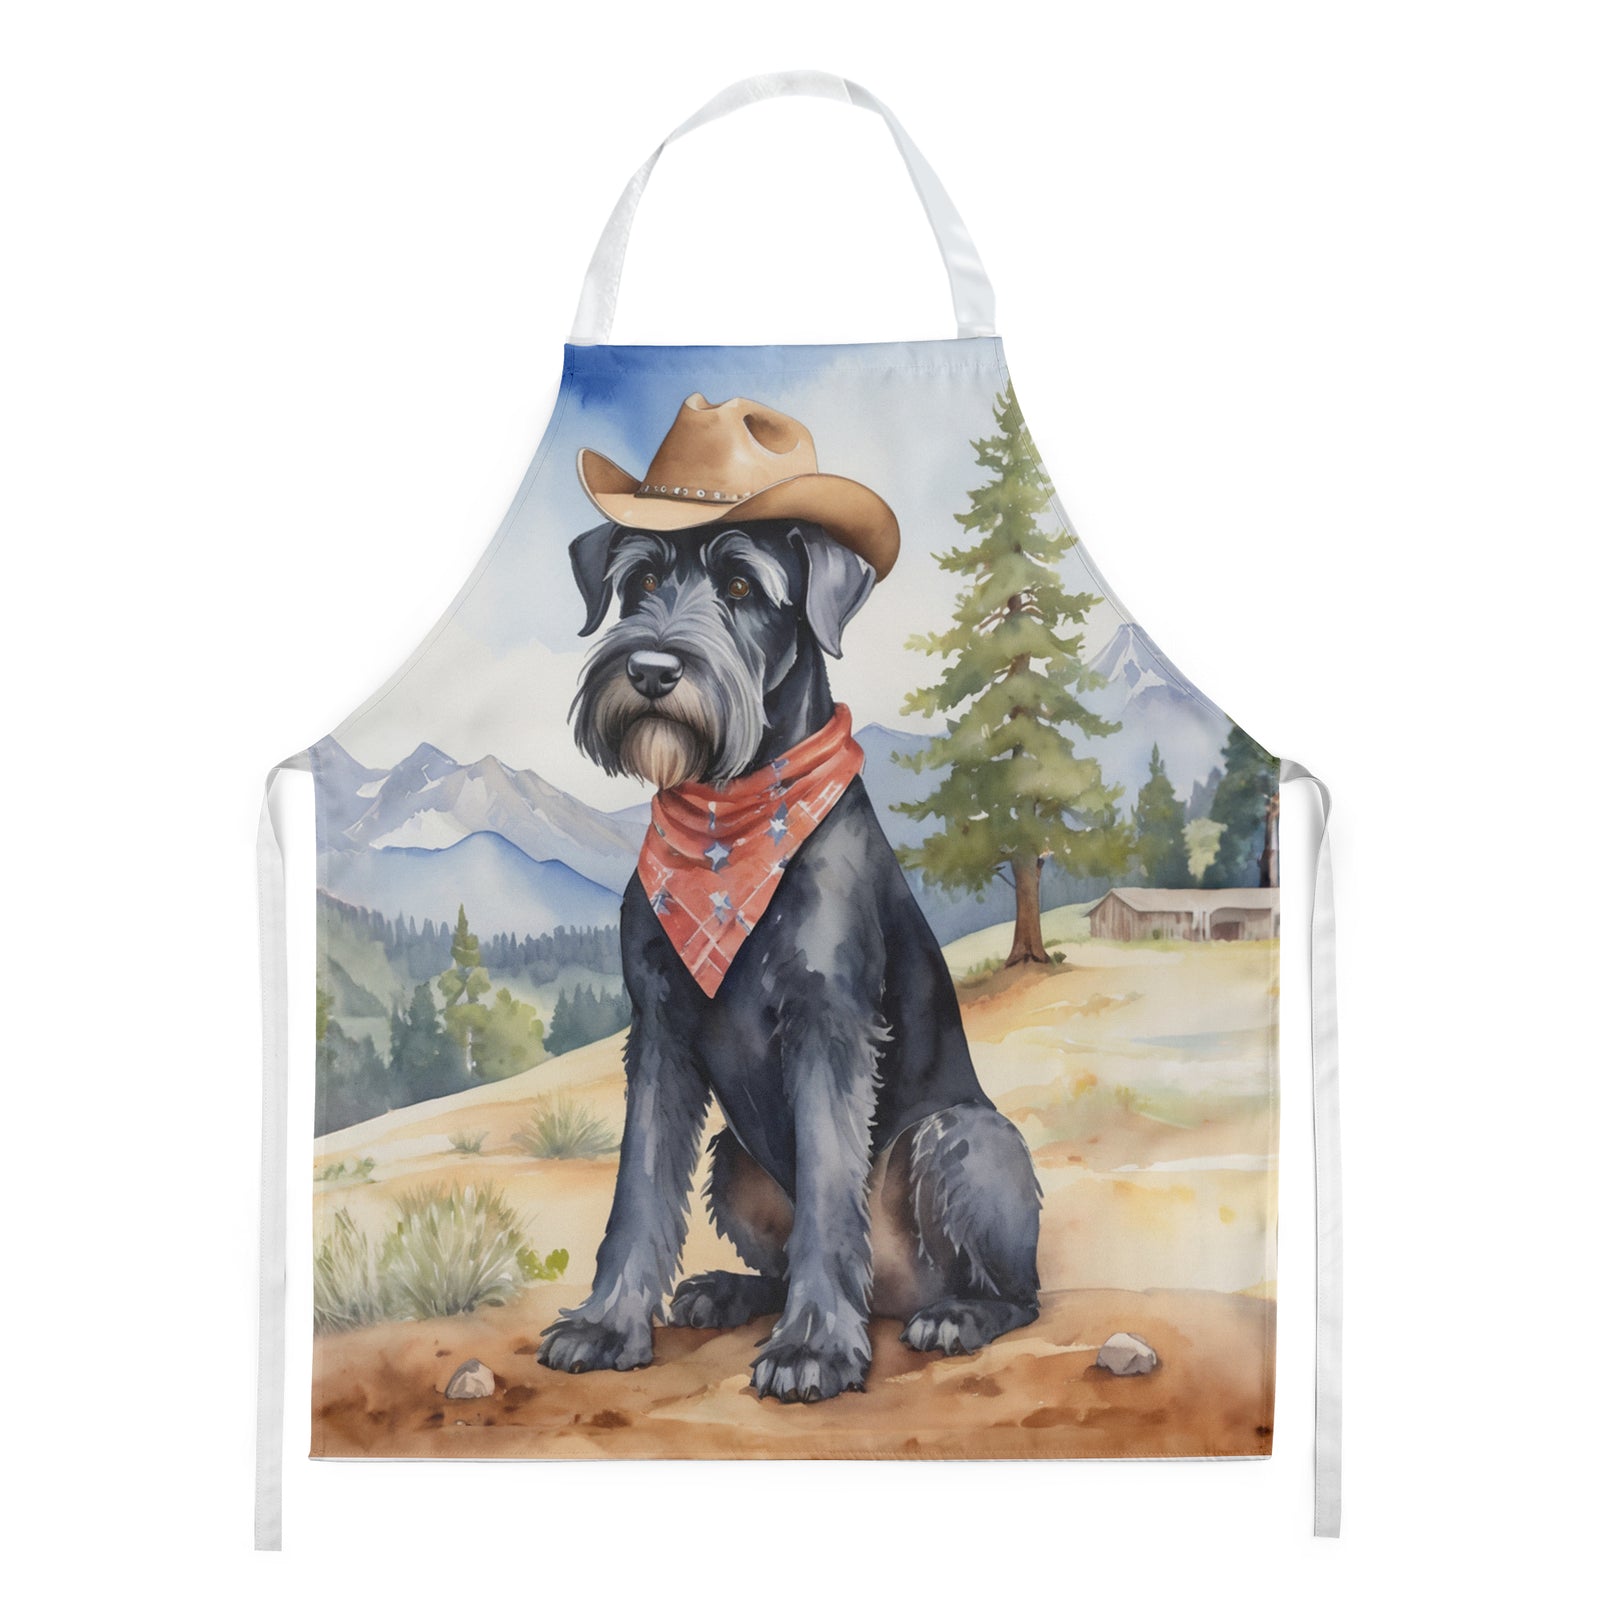 Buy this Giant Schnauzer Cowboy Welcome Apron